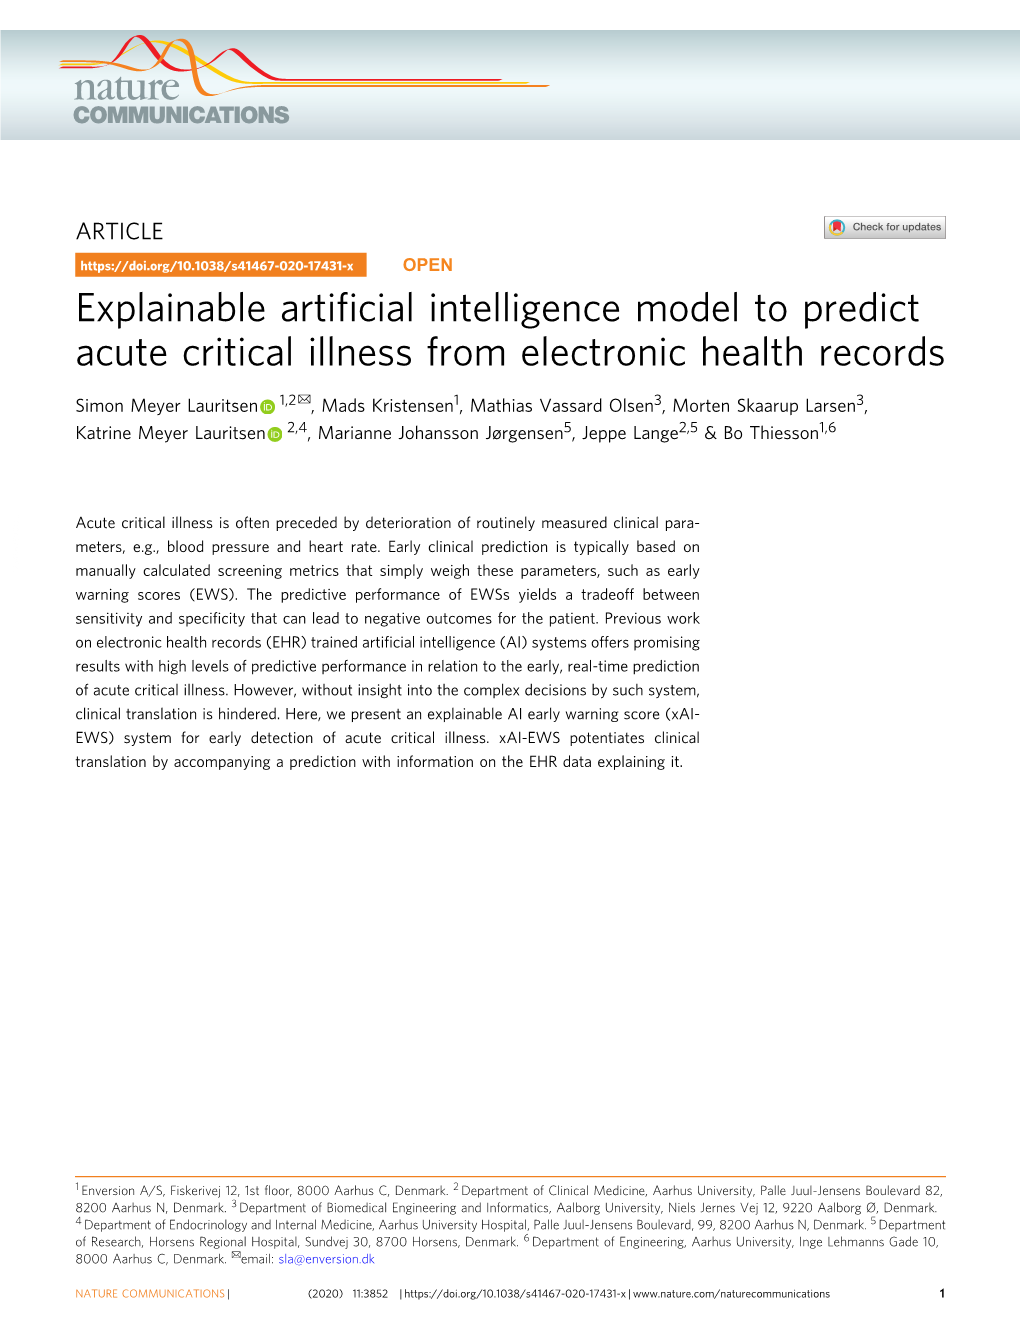 Explainable Artificial Intelligence Model to Predict Acute Critical